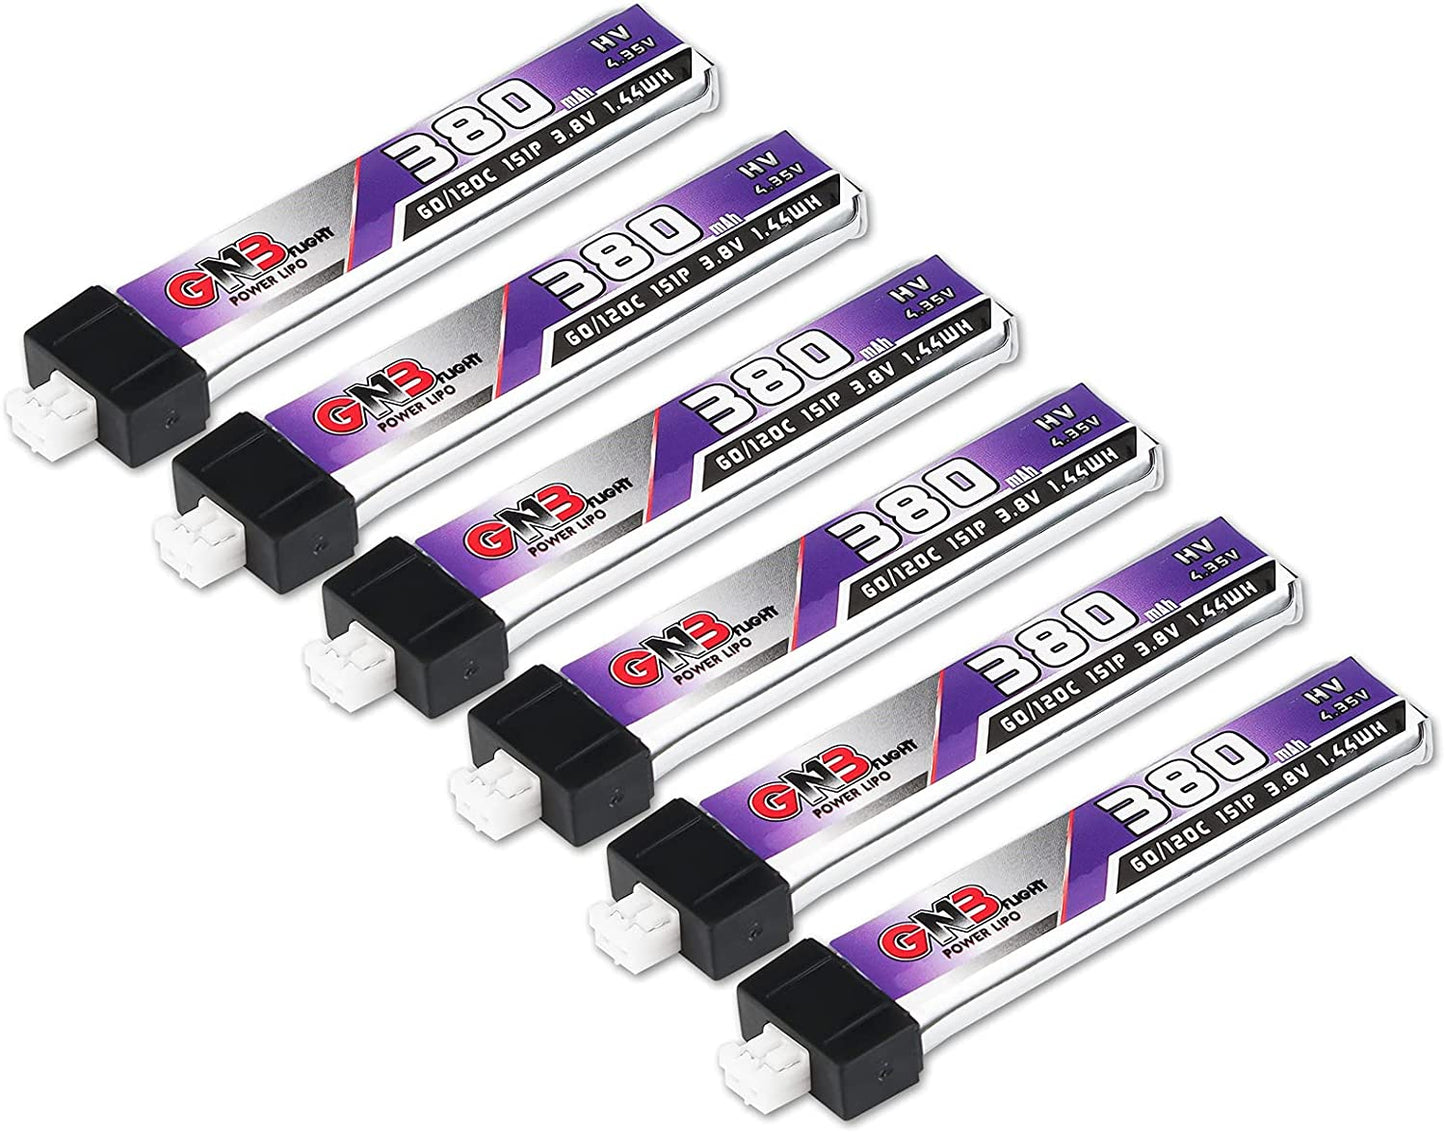 GAONENG 6pcs 380mAh 60C 1S LiPo Battery 3.8V/4.35V LiHv Battery with JST-PH 2.0 Connector for UZ65 Tiny Whoop Micro FPV Racing Drone